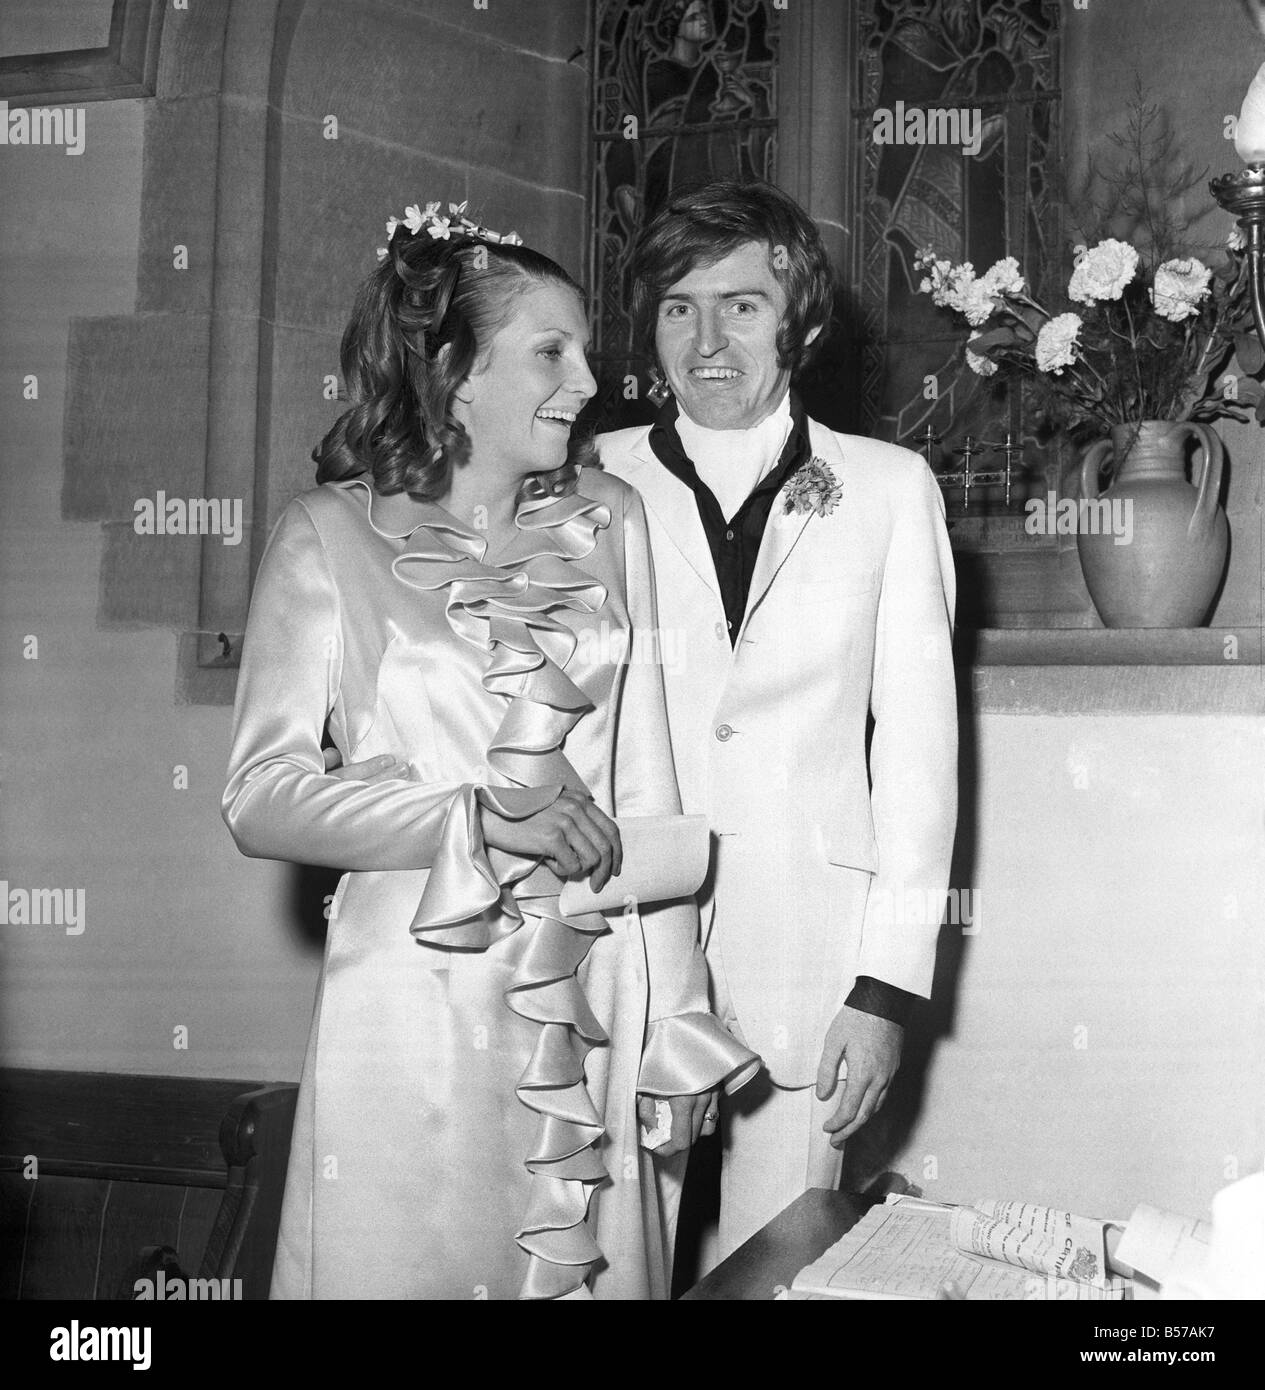 Mike McCartney's Wedding. &#13;&#10;Mike McGear and his bride Angela Fishwick. &#13;&#10;June 1968 &#13;&#10;Y05673-013 Stock Photo